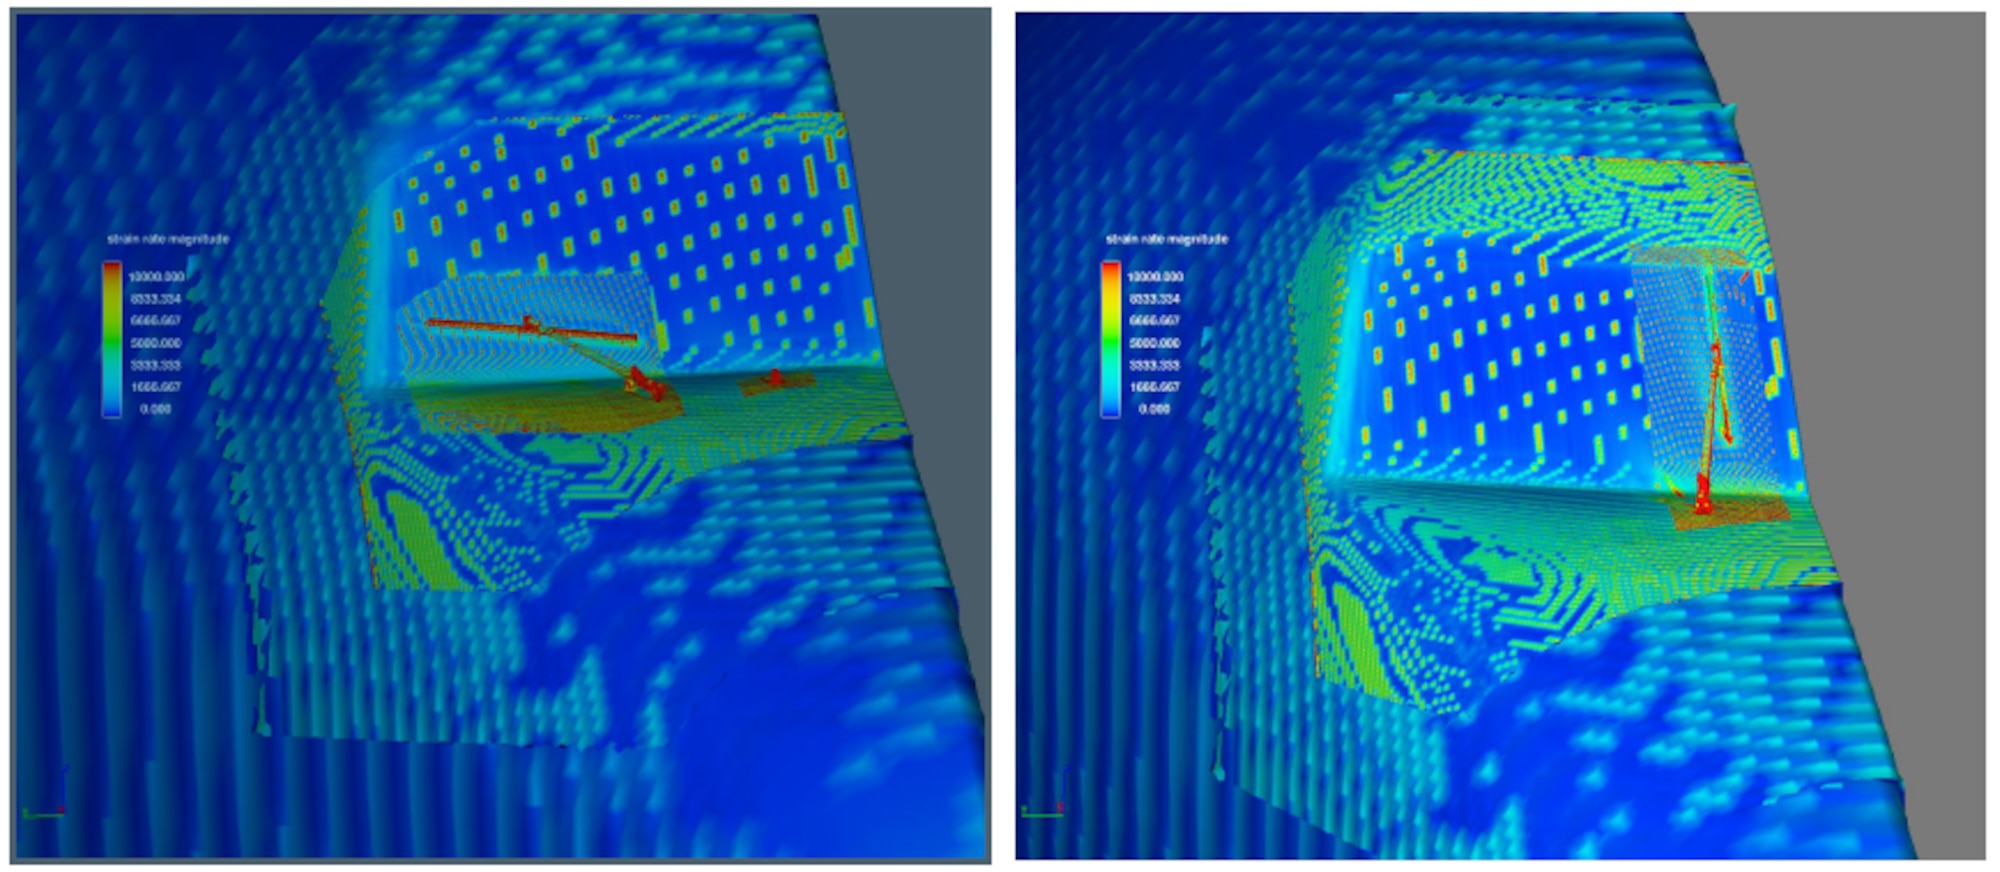 Computational fluid dynamics (CFD) analysis, conducted by Air Force Research Laboratory (AFRL) and Southwest Research Institute, shows the nose of a KC-135 Stratotanker, as the wiper blades are positioned horizontally (left) and vertically (right). The red indicates an area of high aerodynamic drag.